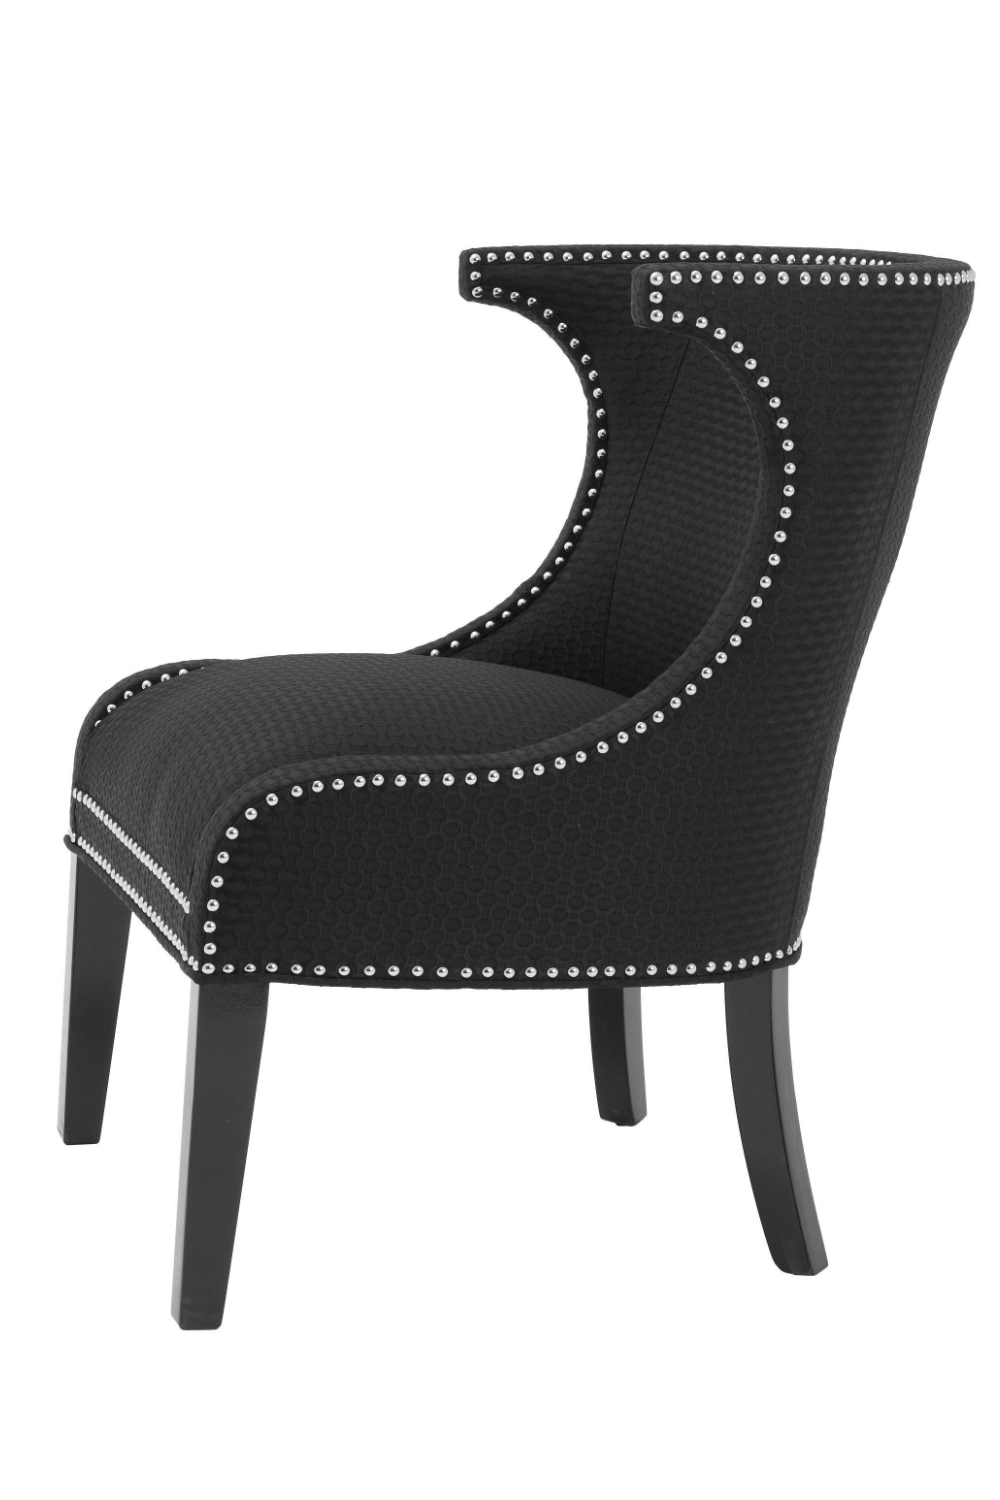 Black Studded Wing Chair | Eichholtz Elson | Oroa.com